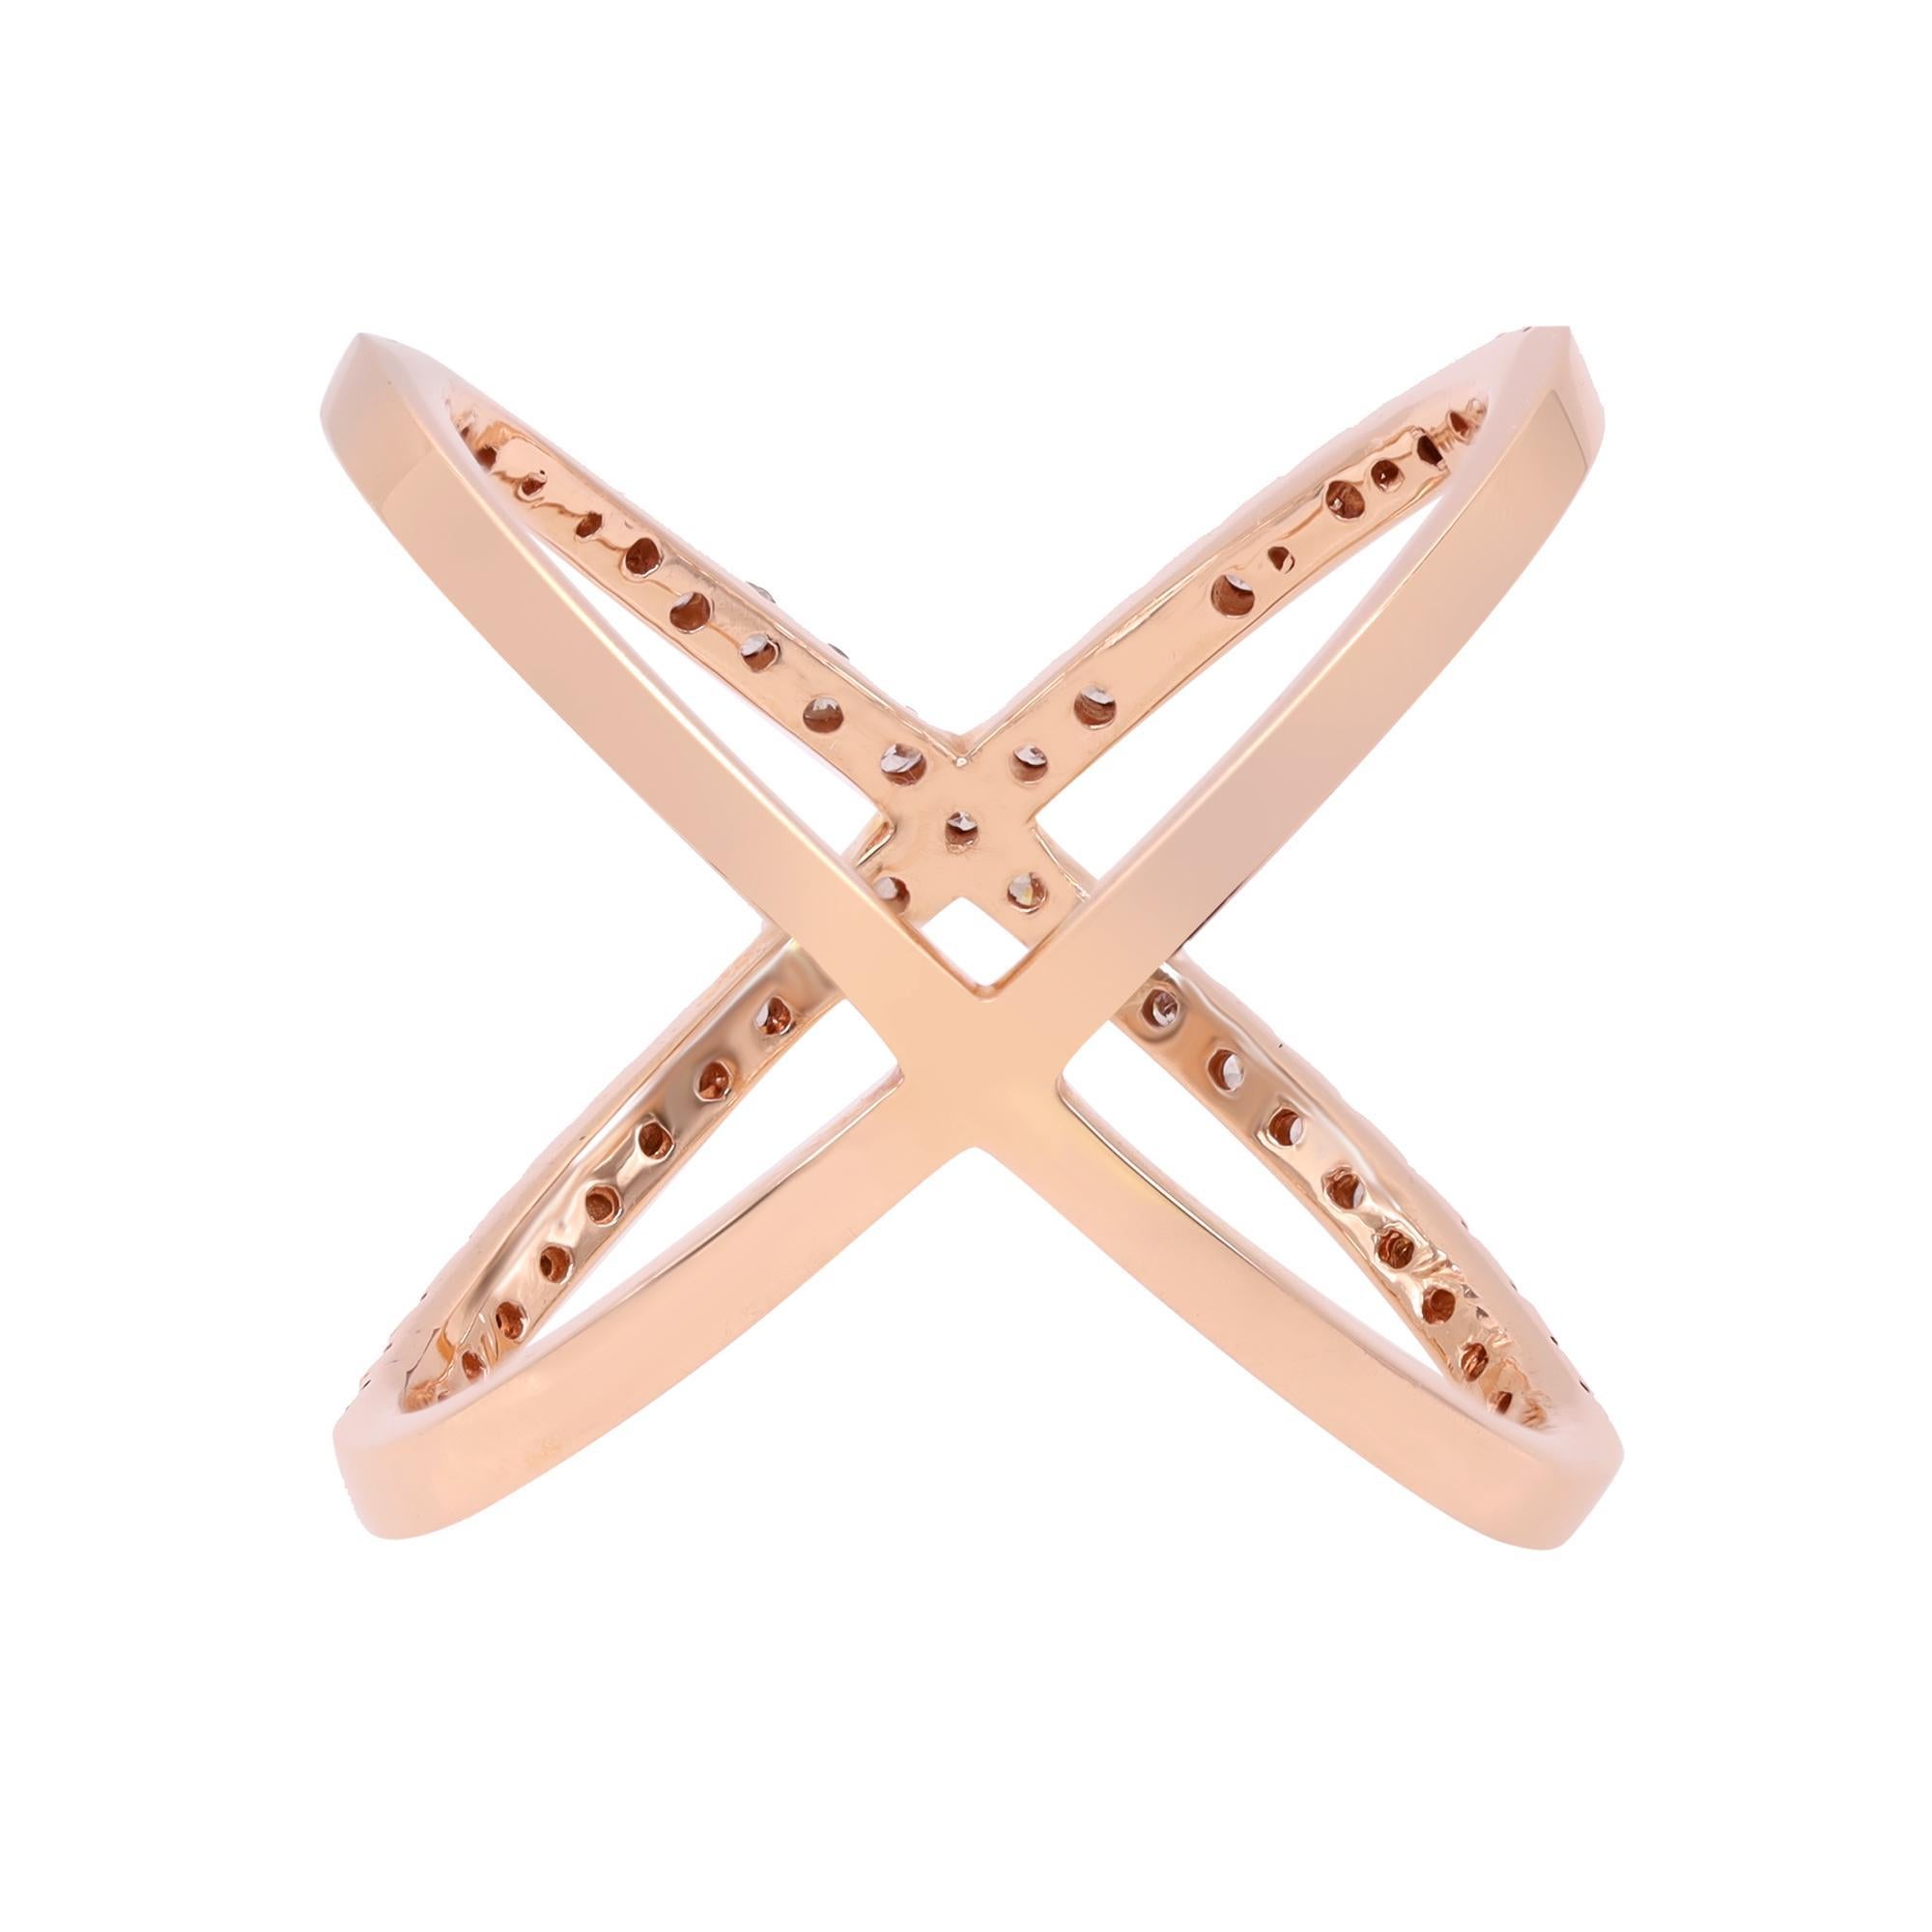 This amazing 14k rose gold X ring is accented by lines of pave diamonds along the top of the ring. Total diamond carat weight is 0.56. Diamond color I and SI-I clarity. Ring size 7.25. Comes with a presentable gift box and appraisal. 